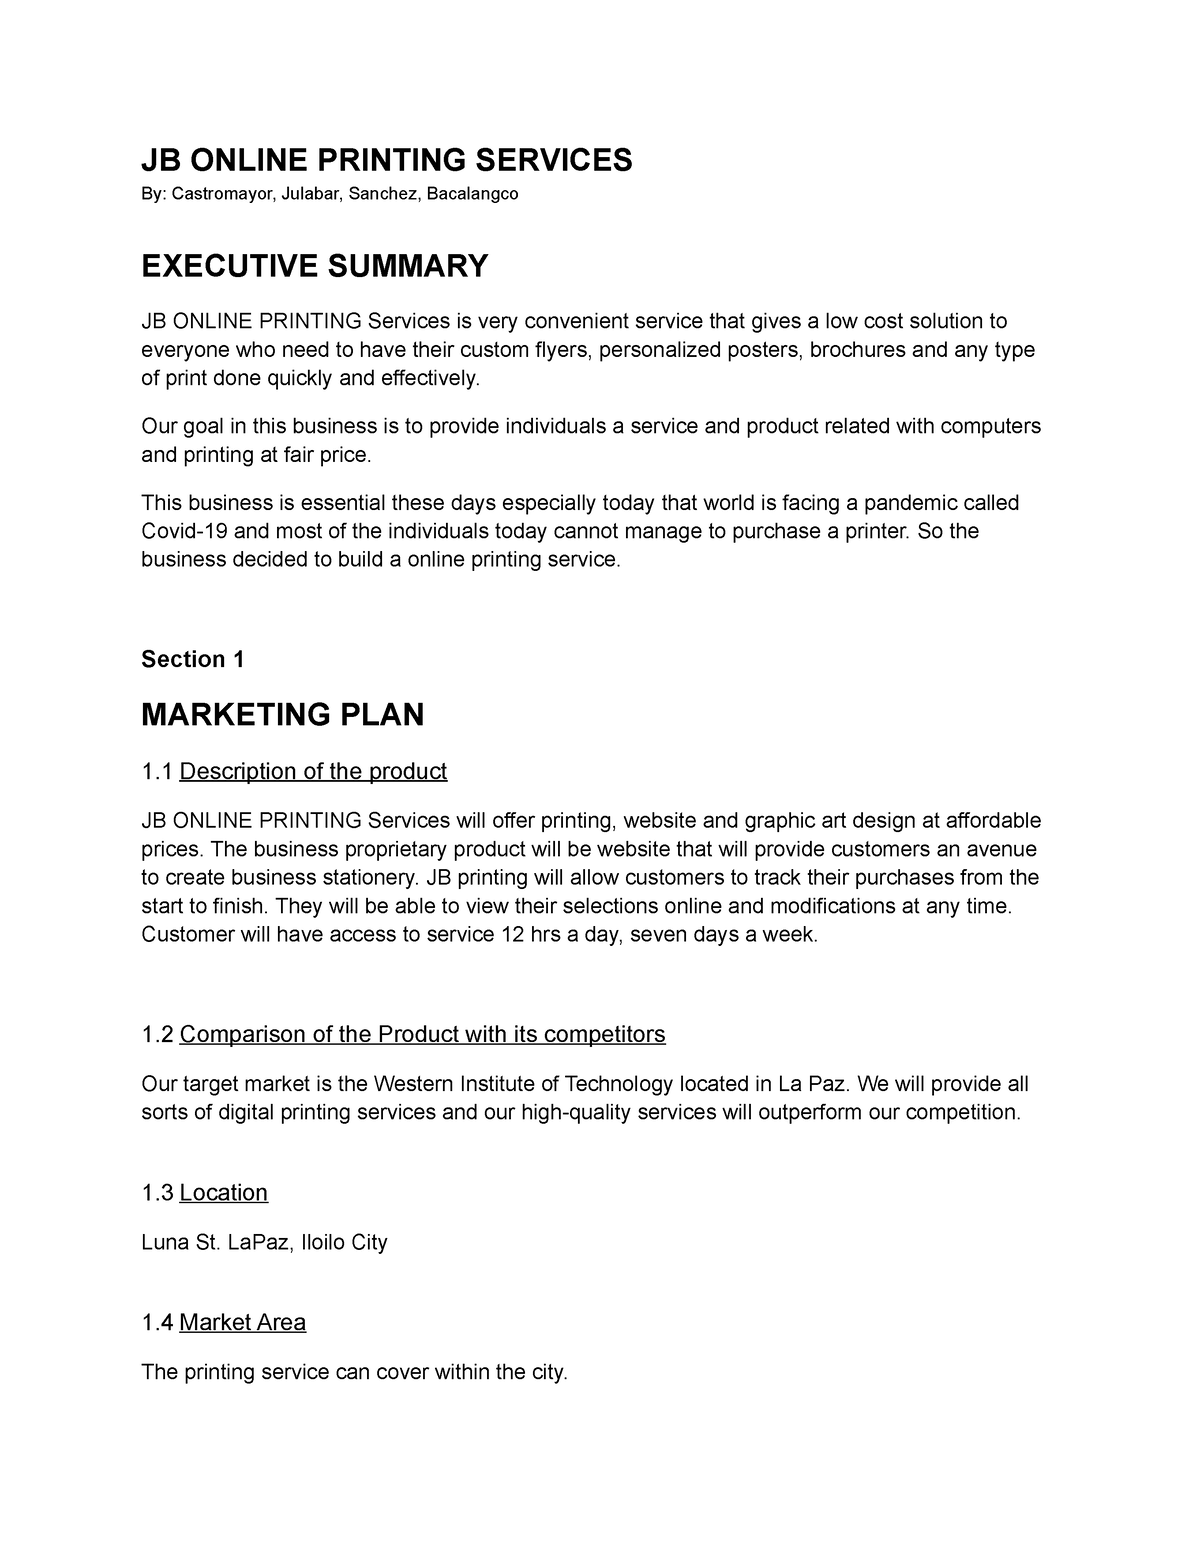 Business-PLAN - this is a lecture notes - JB ONLINE PRINTING SERVICES ...